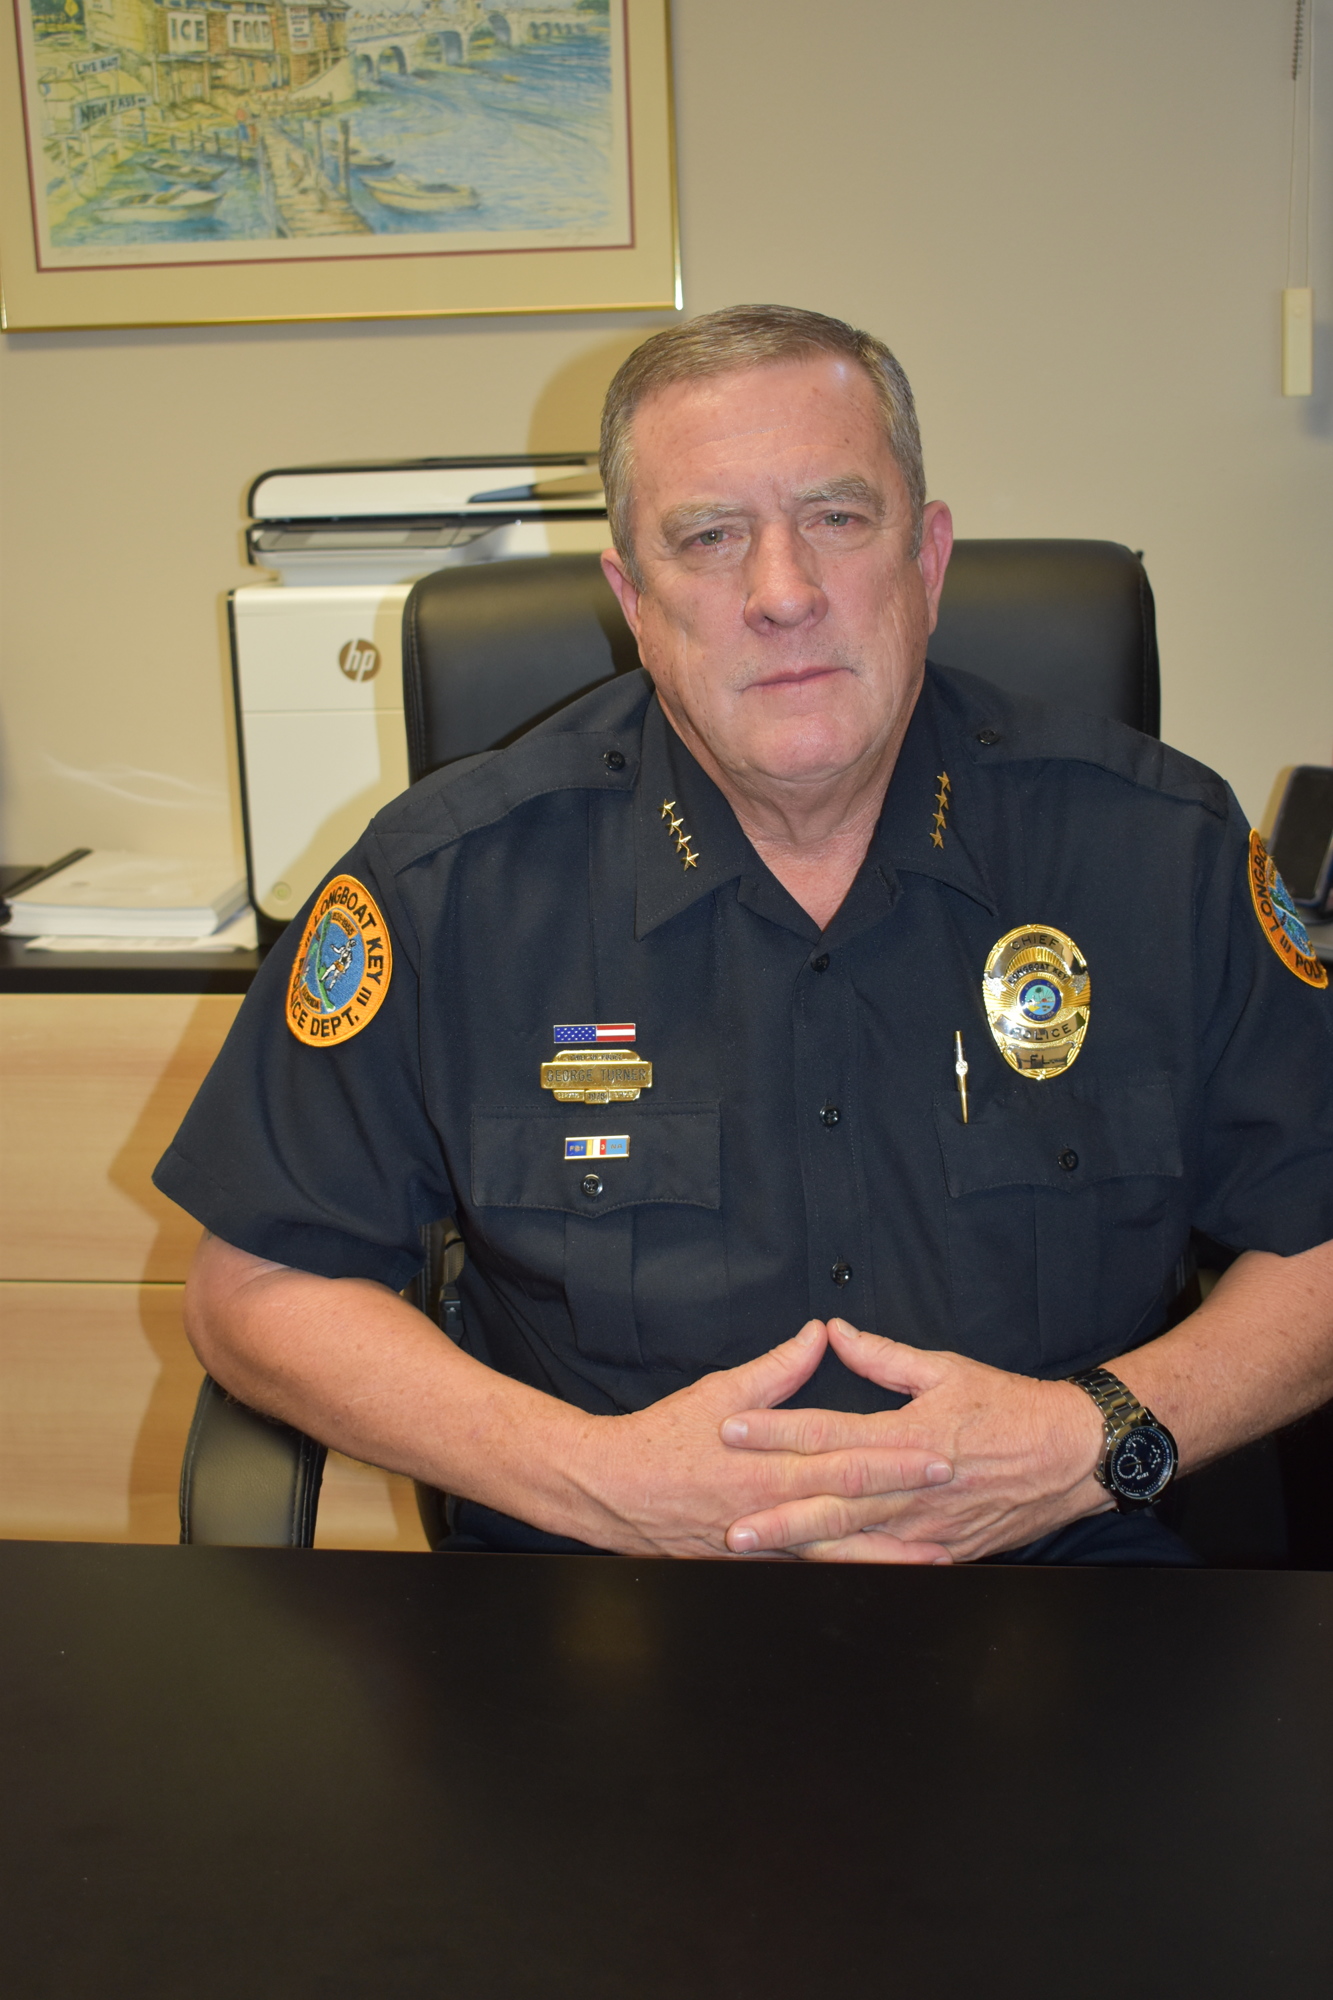 George Turner has served as Longboat Key's interim police chief since late April 2021.